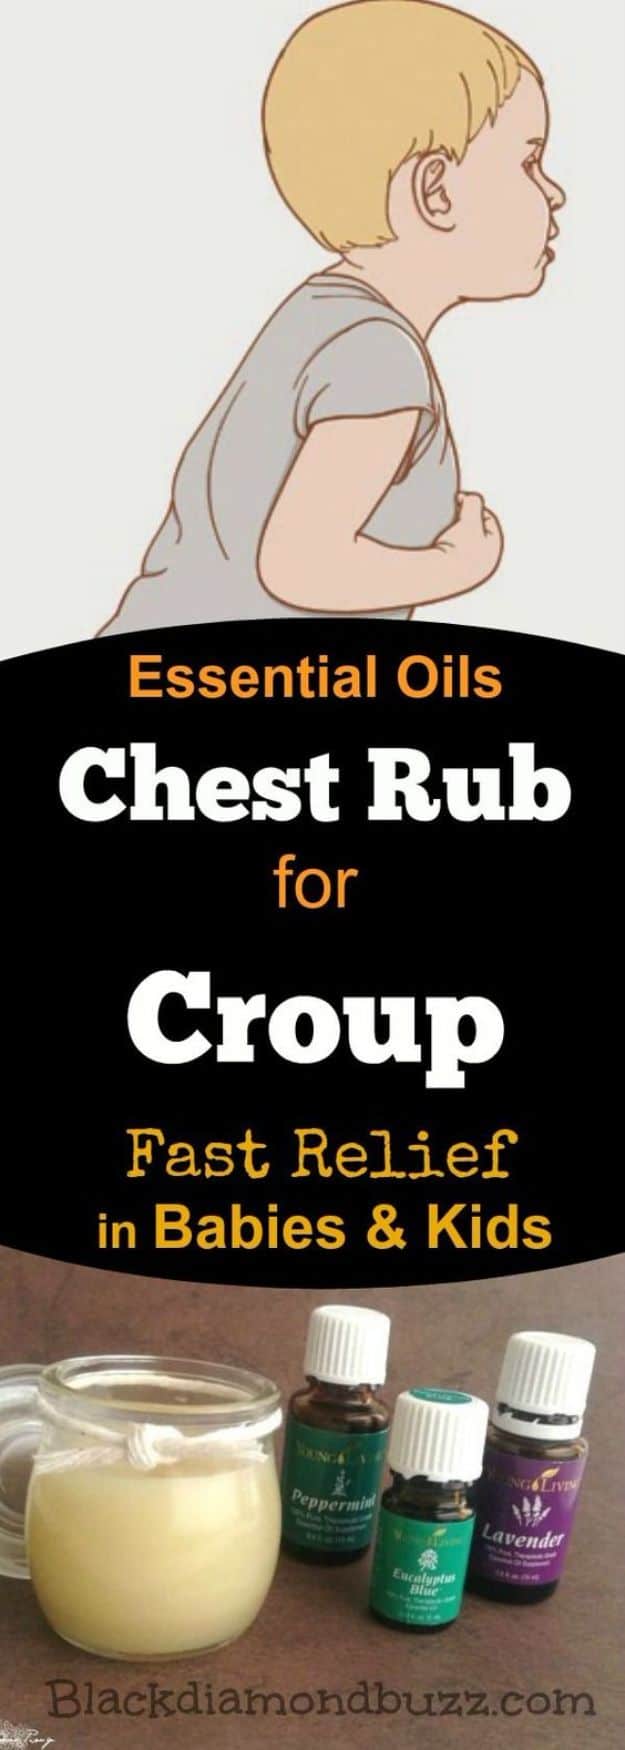 DIY Essential Oil Recipes and Ideas - Essential Oils for Croup Cough in Babies and Kids - Cool Recipes, Crafts and Home Decor to Make With Essential Oil - Diffuser Projects, Roll On Prodicts for Skin - Recipe Tutorials for Cleaning, Colds, For Sleep, For Hair, For Paint, For Weight Loss #crafts #diy #essentialoils